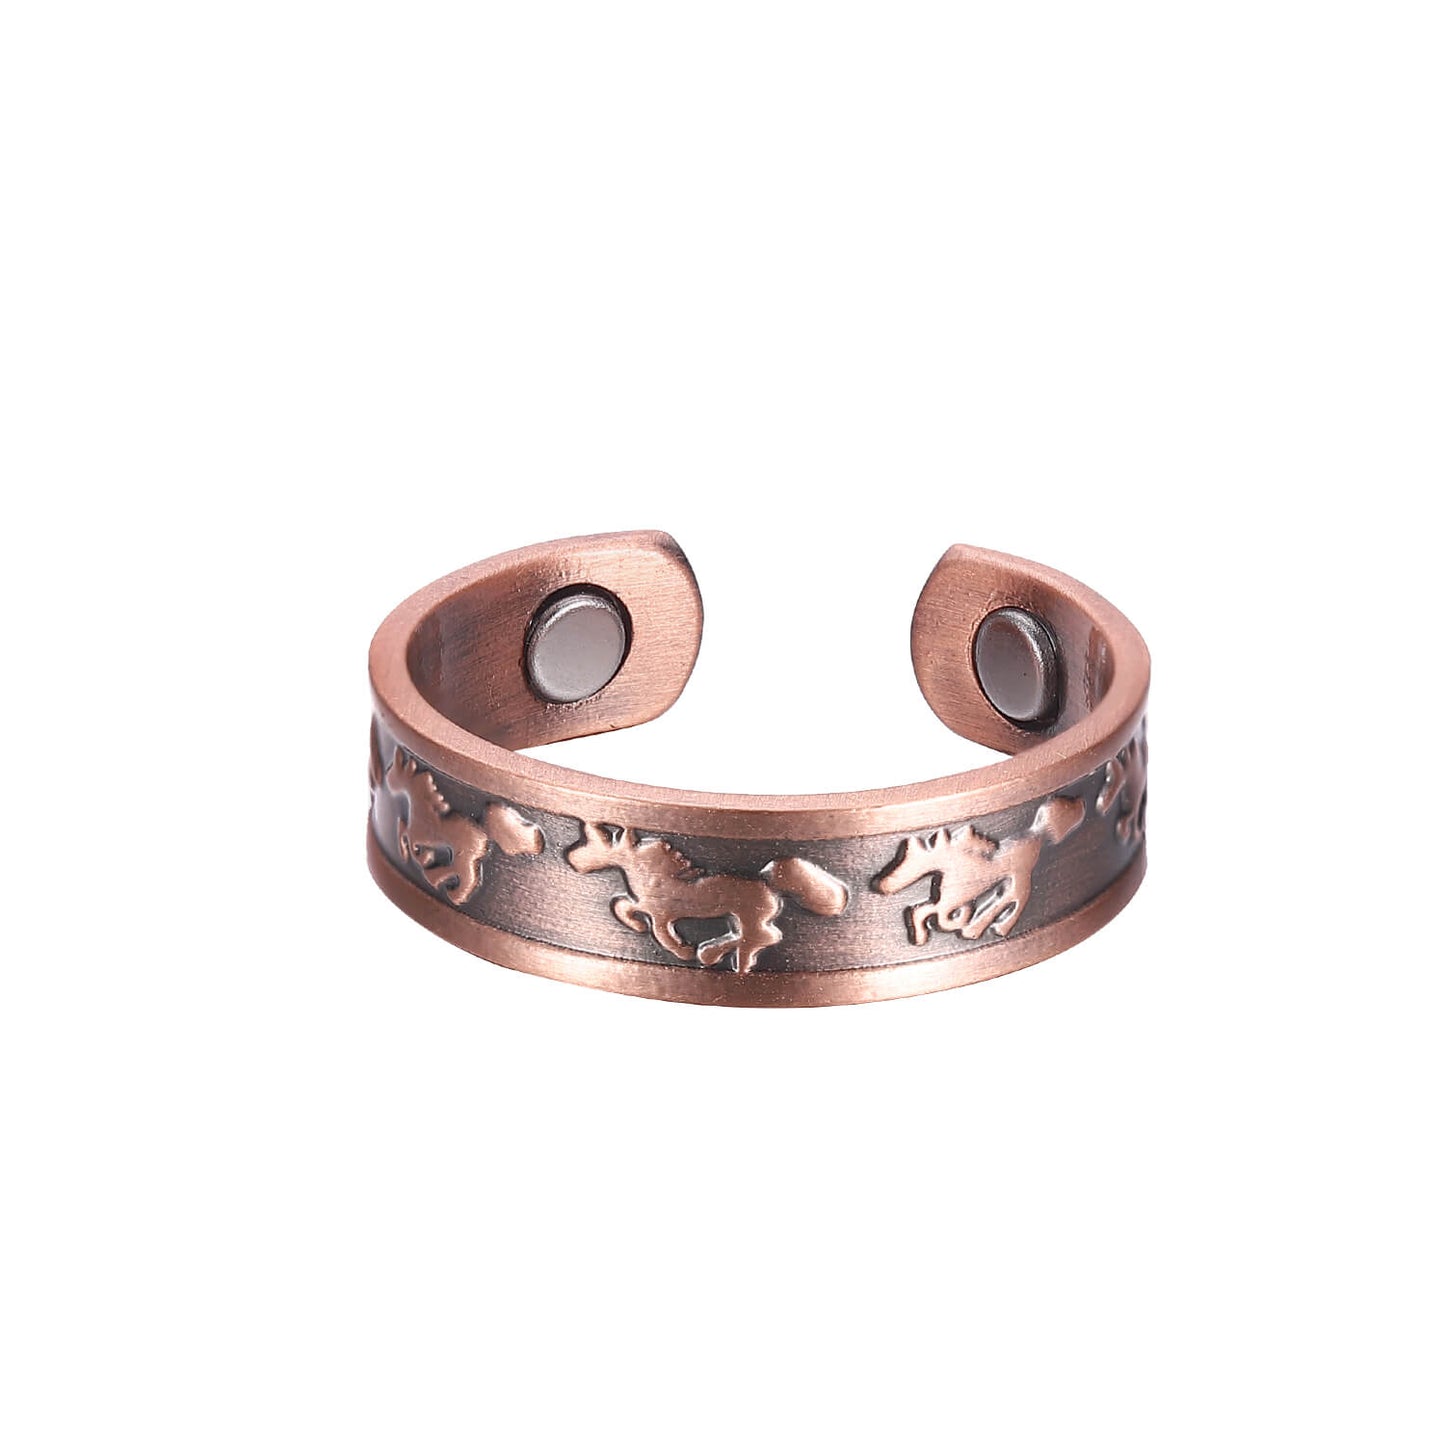 51. The Sawyer - Horse Copper RING